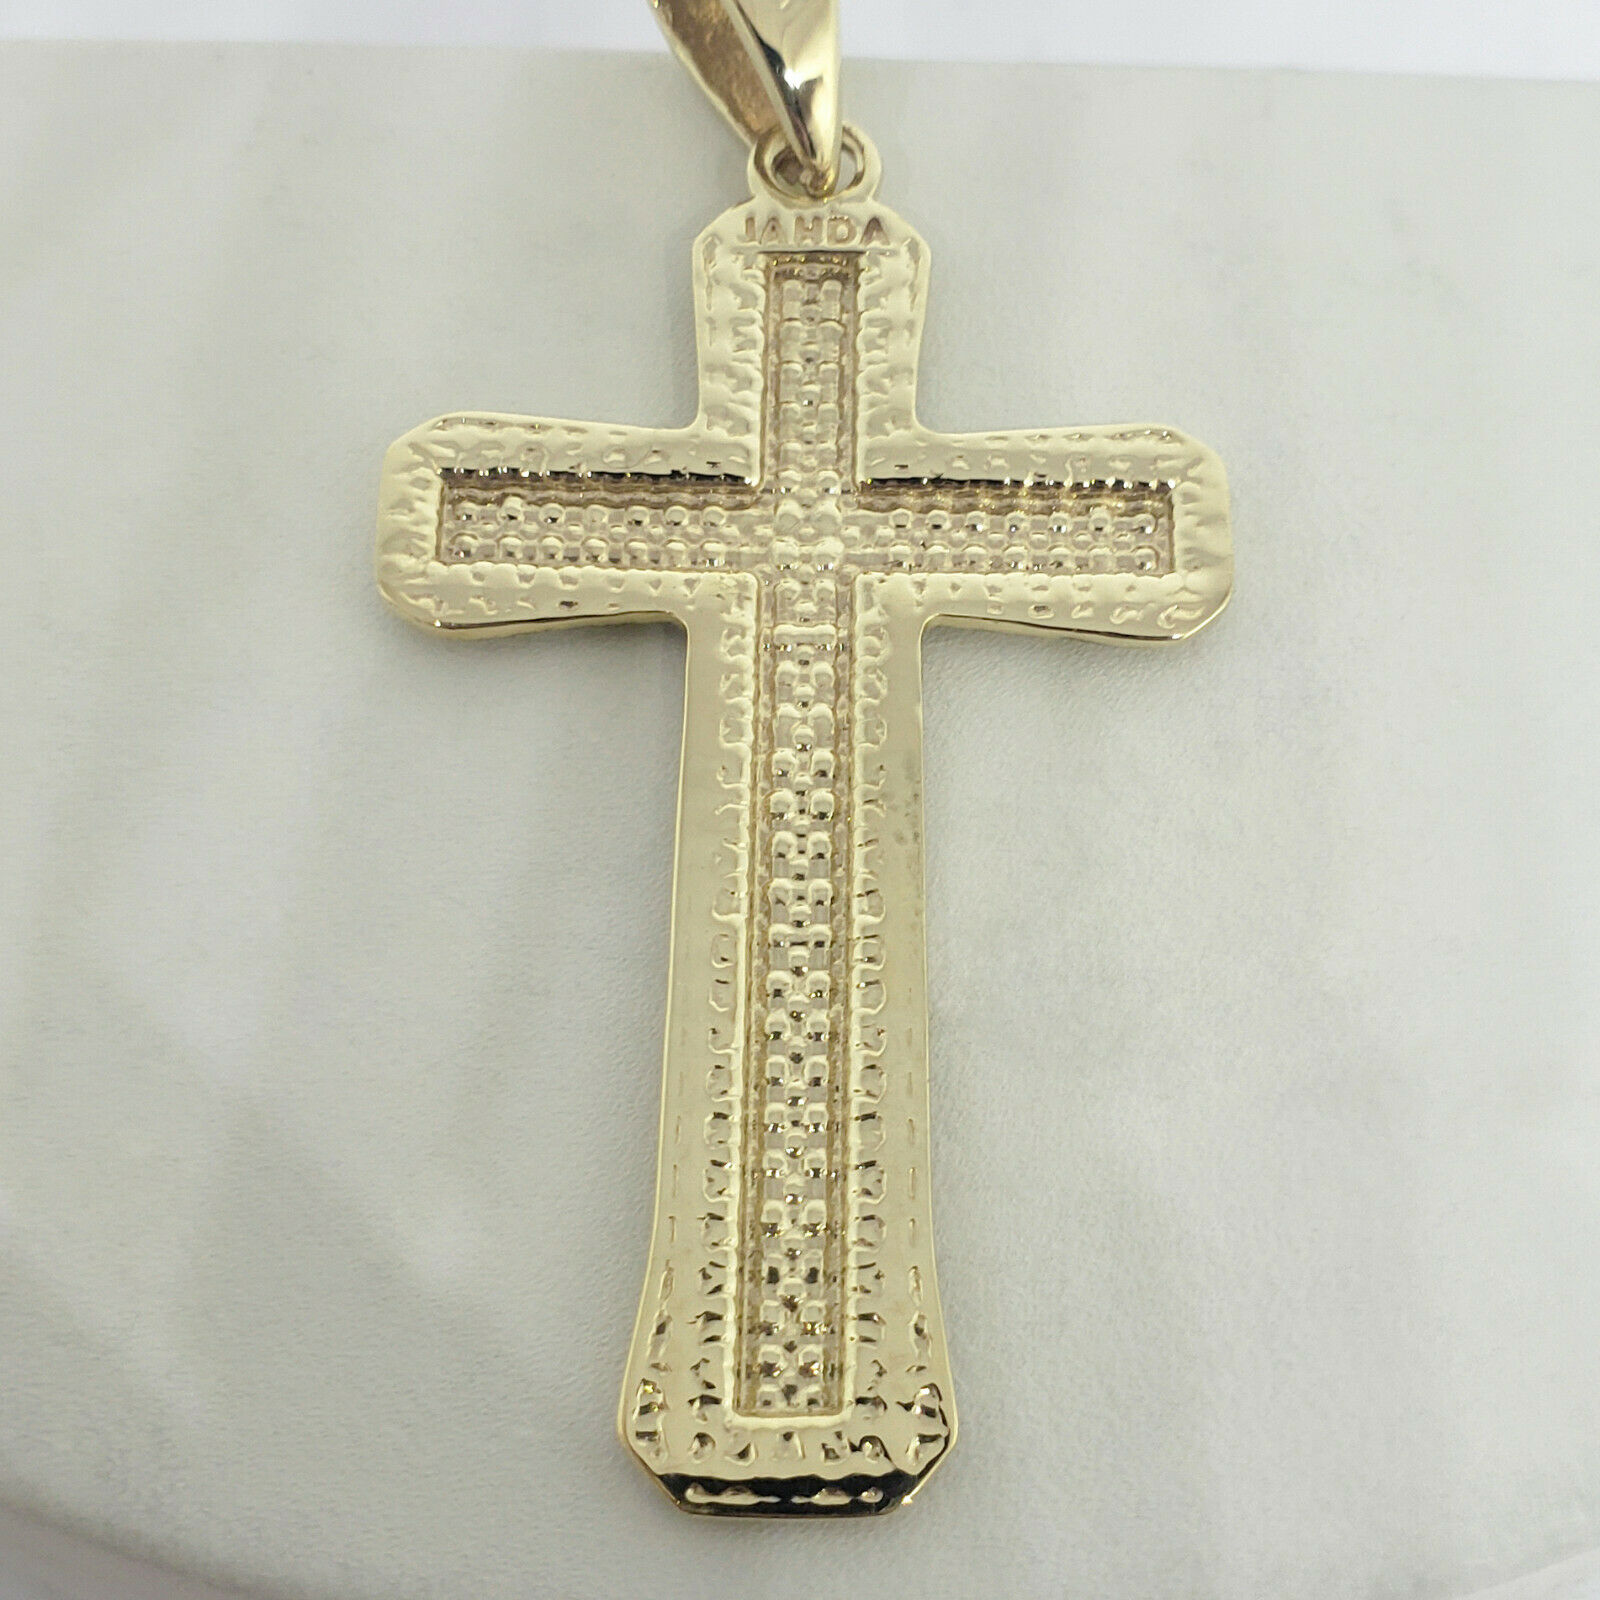 Details about   10K Solid Yellow Gold 2.25" Diamond Cut Ankh Nugget Cross Charm Pendant. 